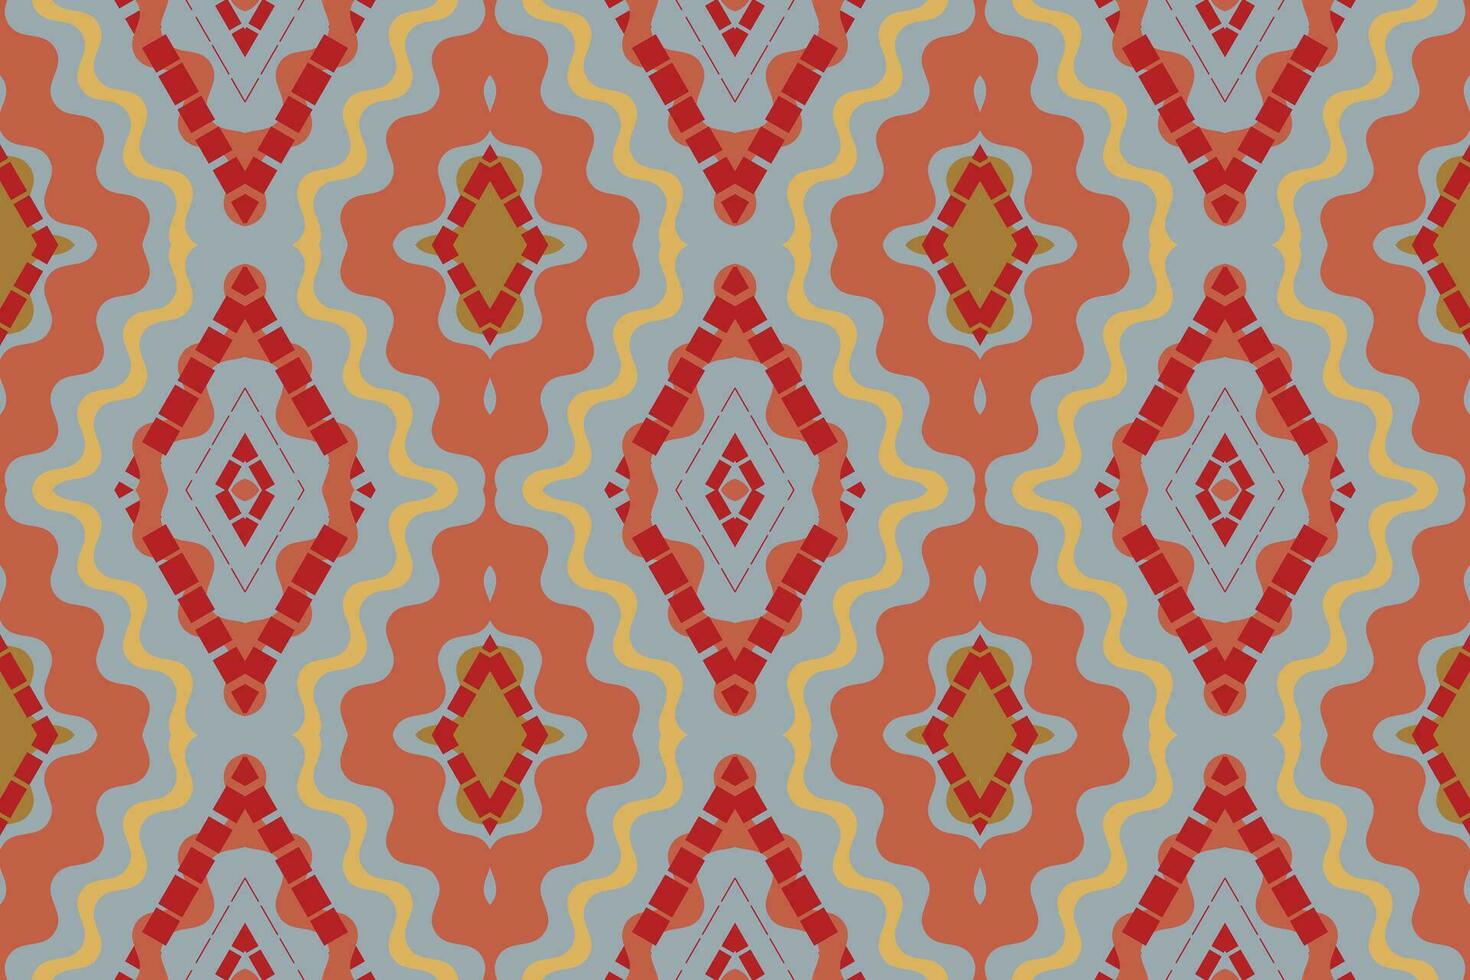 Ikat Floral Paisley Embroidery Background. Ikat Frame Geometric Ethnic Oriental Pattern traditional.aztec Style Abstract Vector illustration.design for Texture,fabric,clothing,wrapping,sarong.